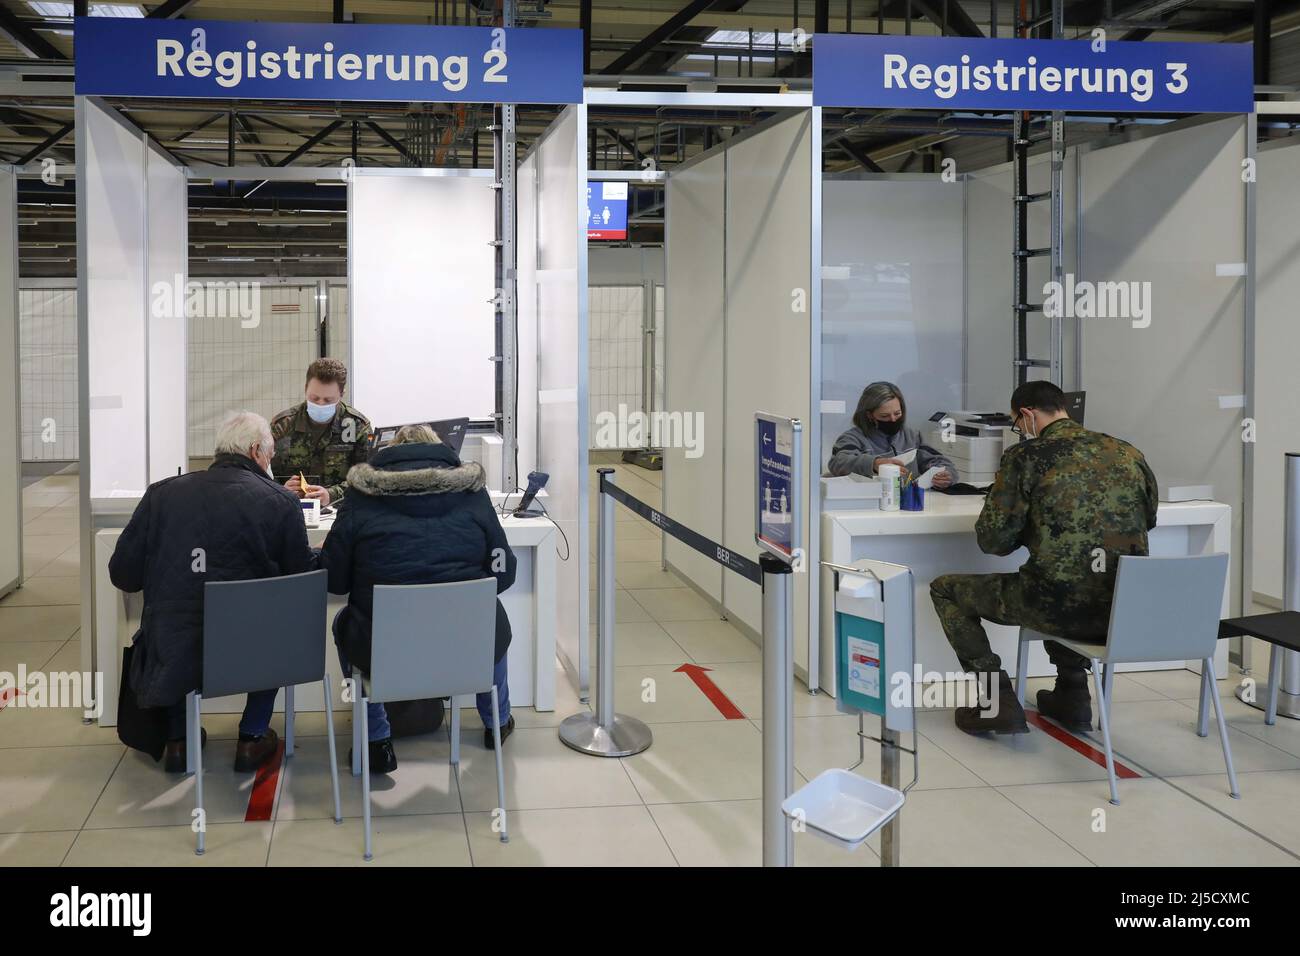 Schoenefeld, DEU, 15.01.2021 - Bundeswehr soldiers registering at the vaccination center in Terminal 5 of BER Airport. It is the third vaccination center in Brandenburg. The vaccination center is managed by Johanniter-Unfall-Hilfe. Vaccinations are carried out on site by medical personnel of the Bundeswehr. [automated translation] Stock Photo